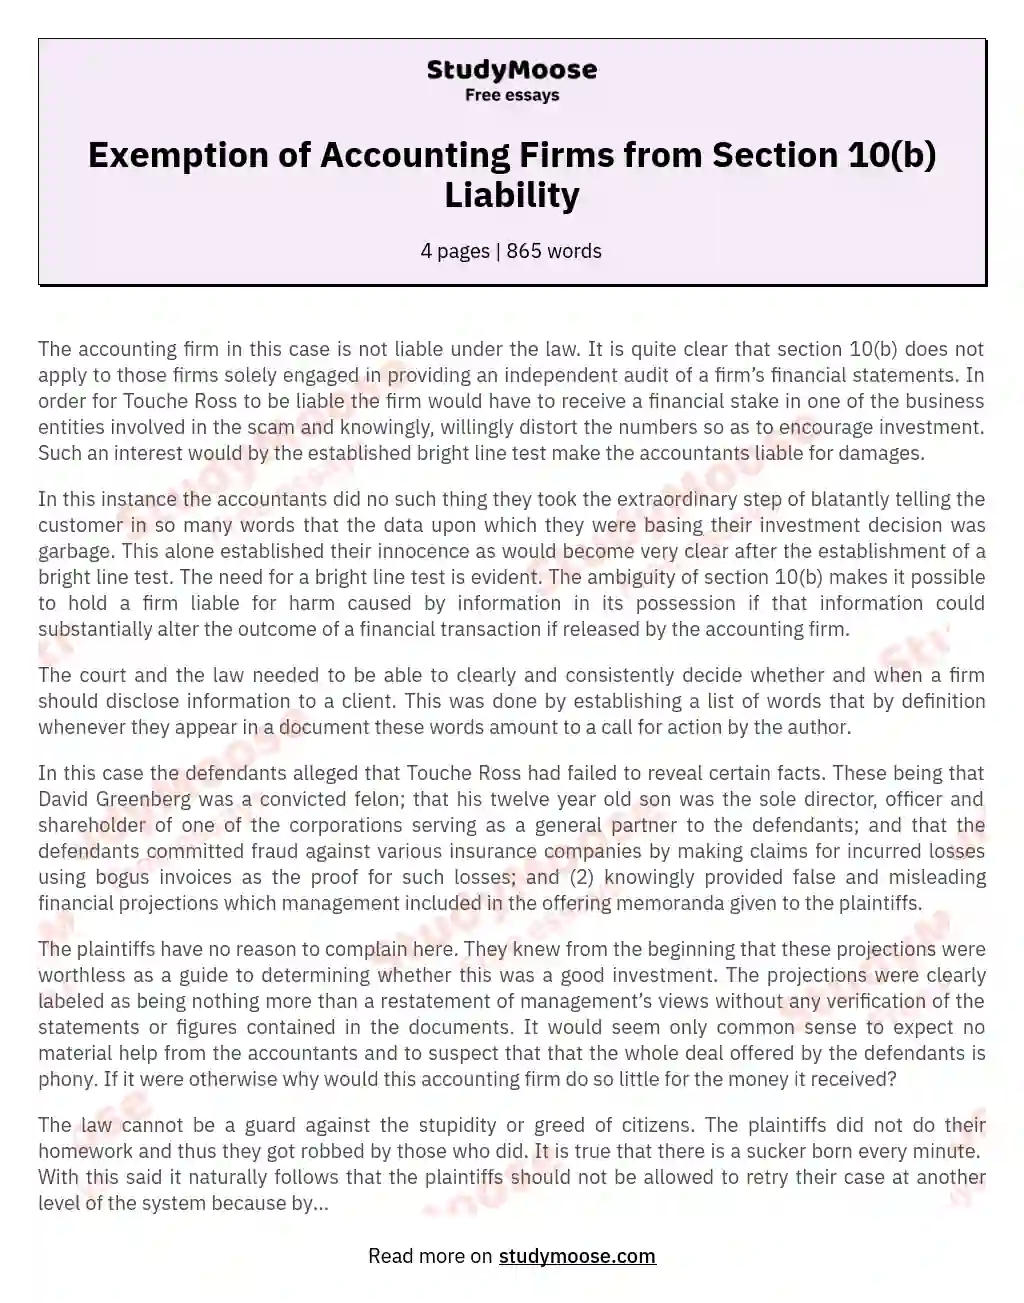 Exemption of Accounting Firms from Section 10(b) Liability essay